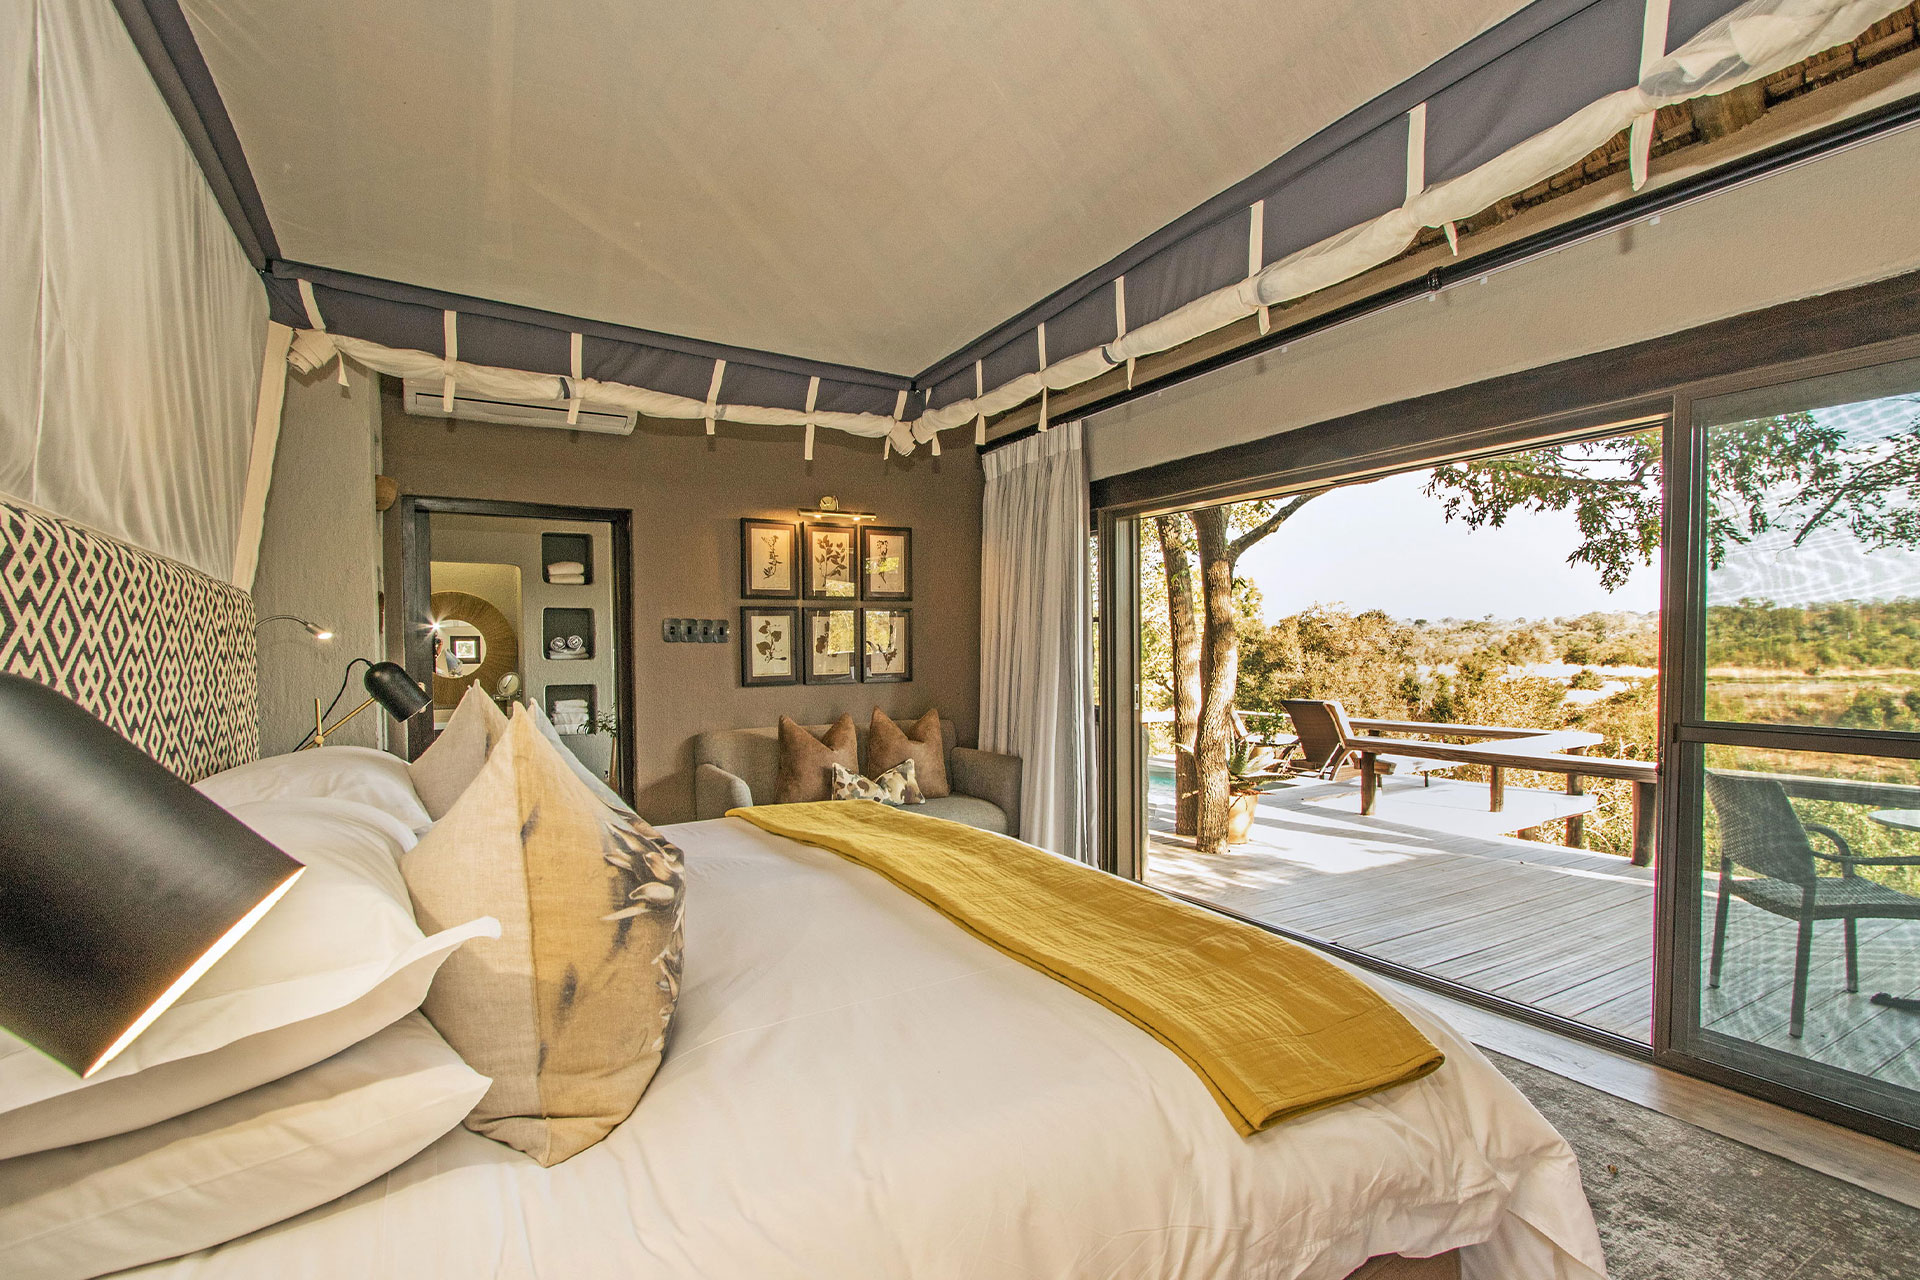 The Waterhole Suite at Simbambili Game Lodge – a lodge from the Thornybush collection.